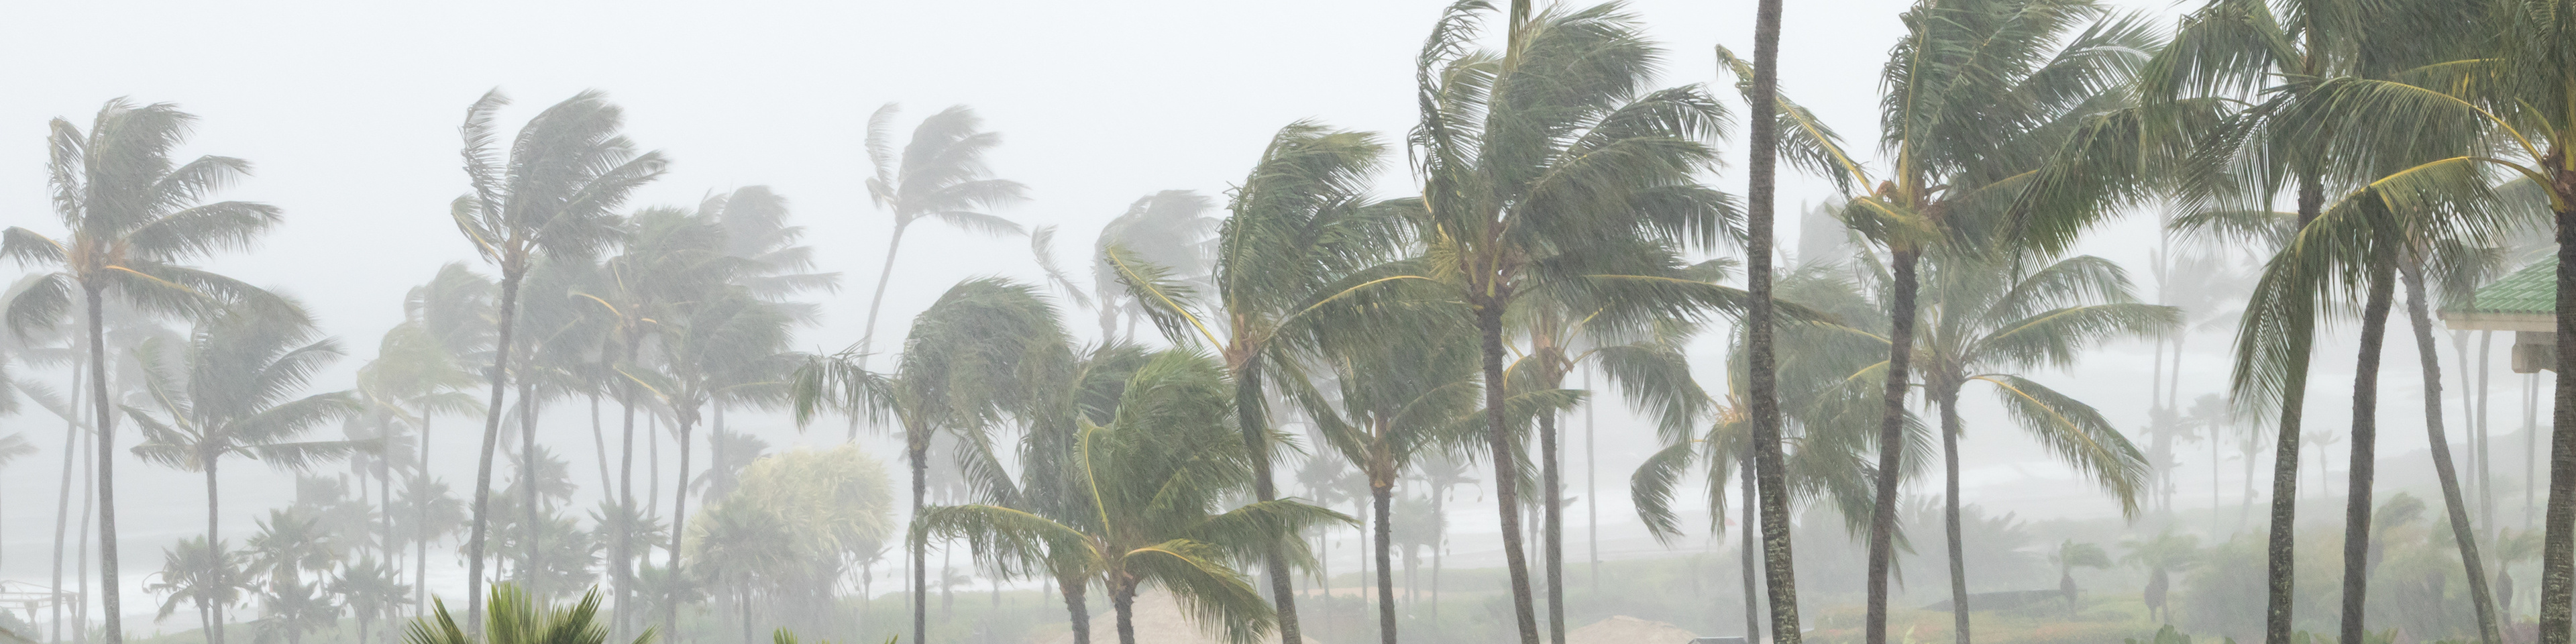 Palm trees blowing in strong winds